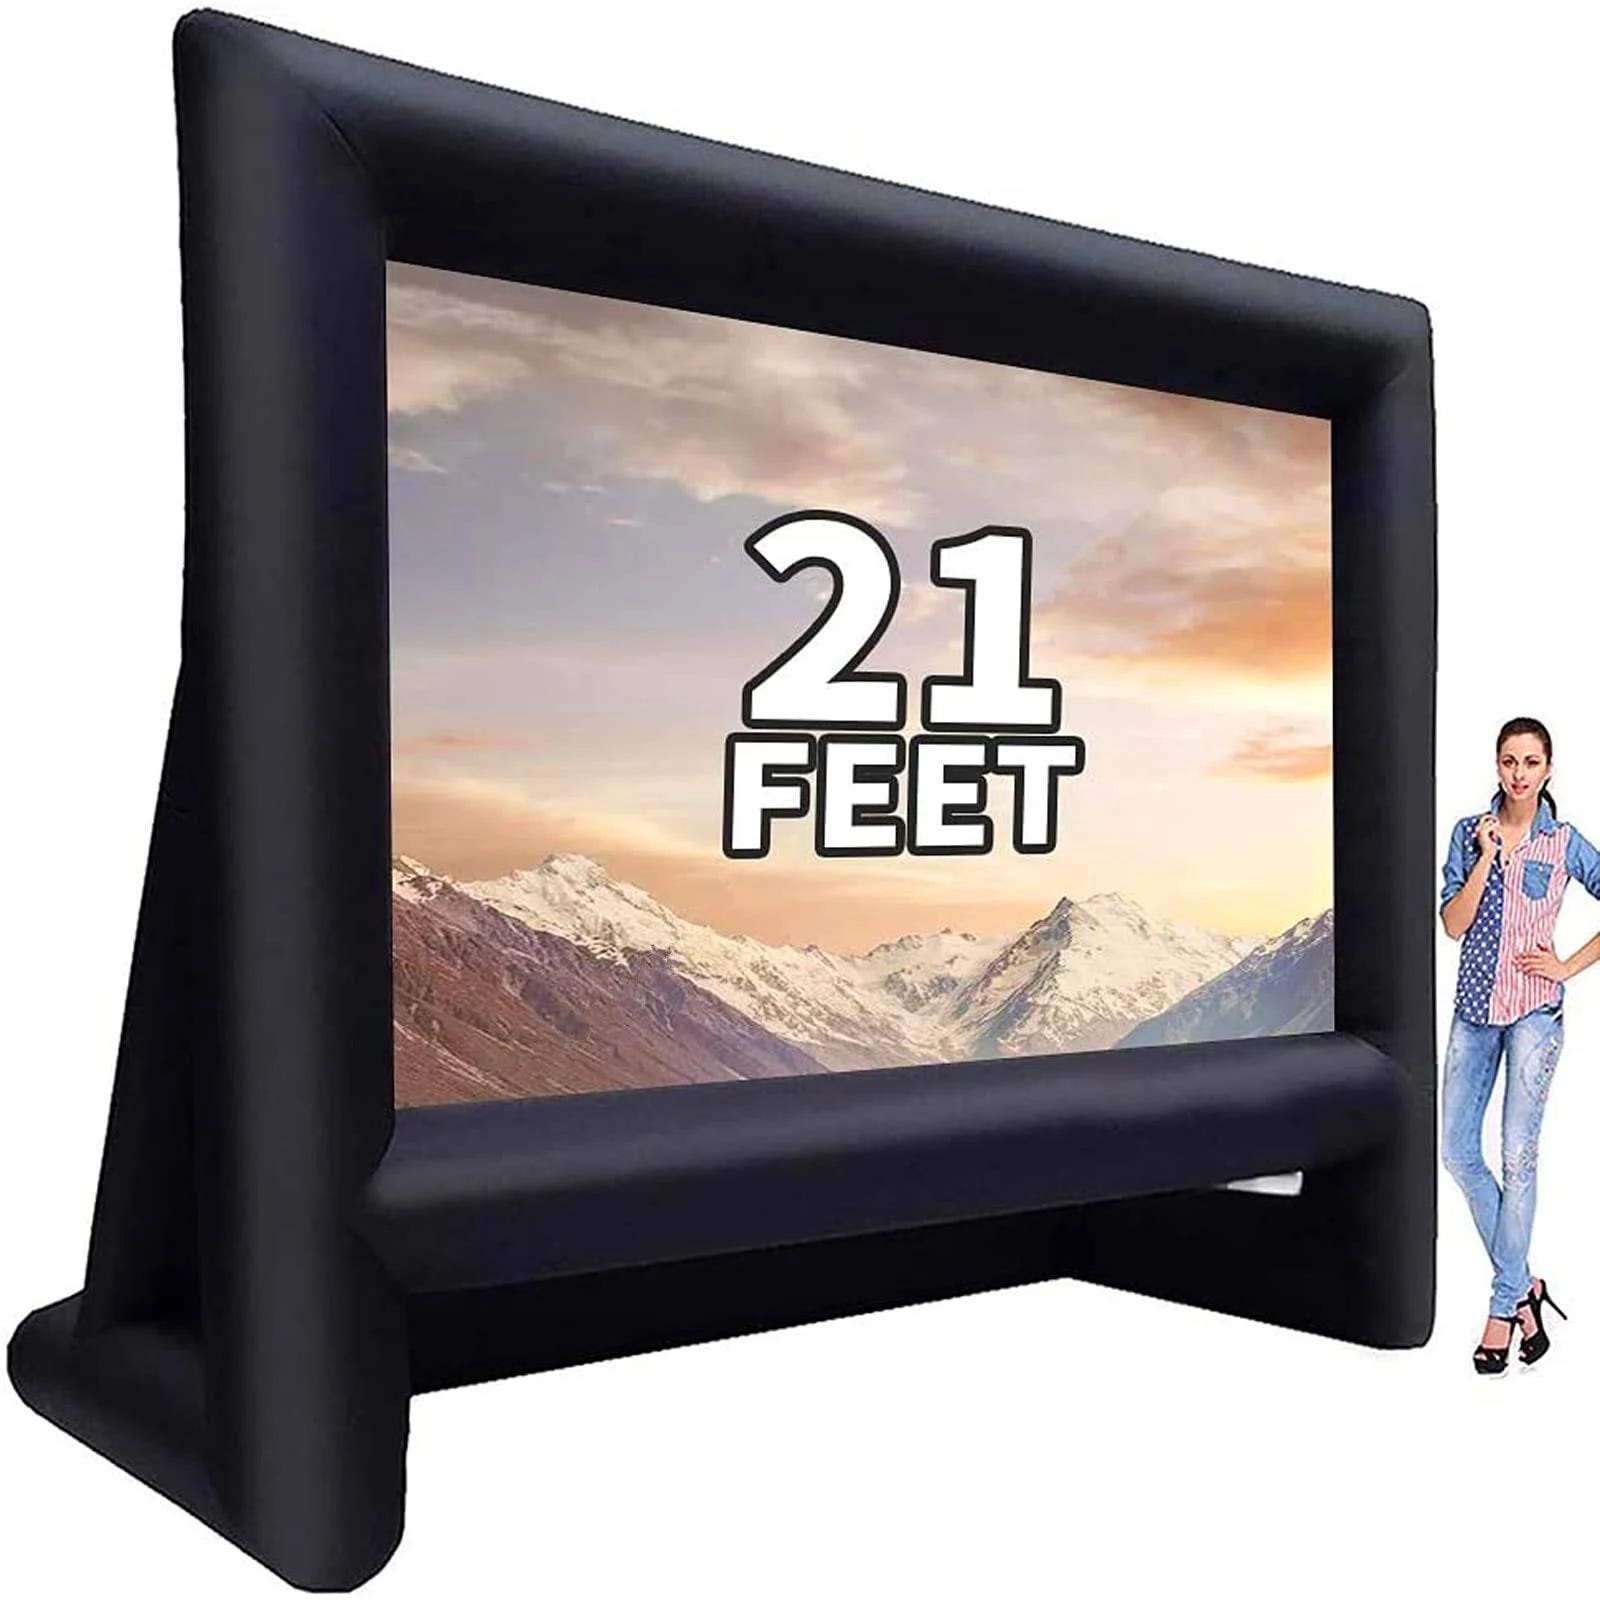 GYUEM 21 Feet Inflatable Outdoor Movie Screen for Home Theater | Image